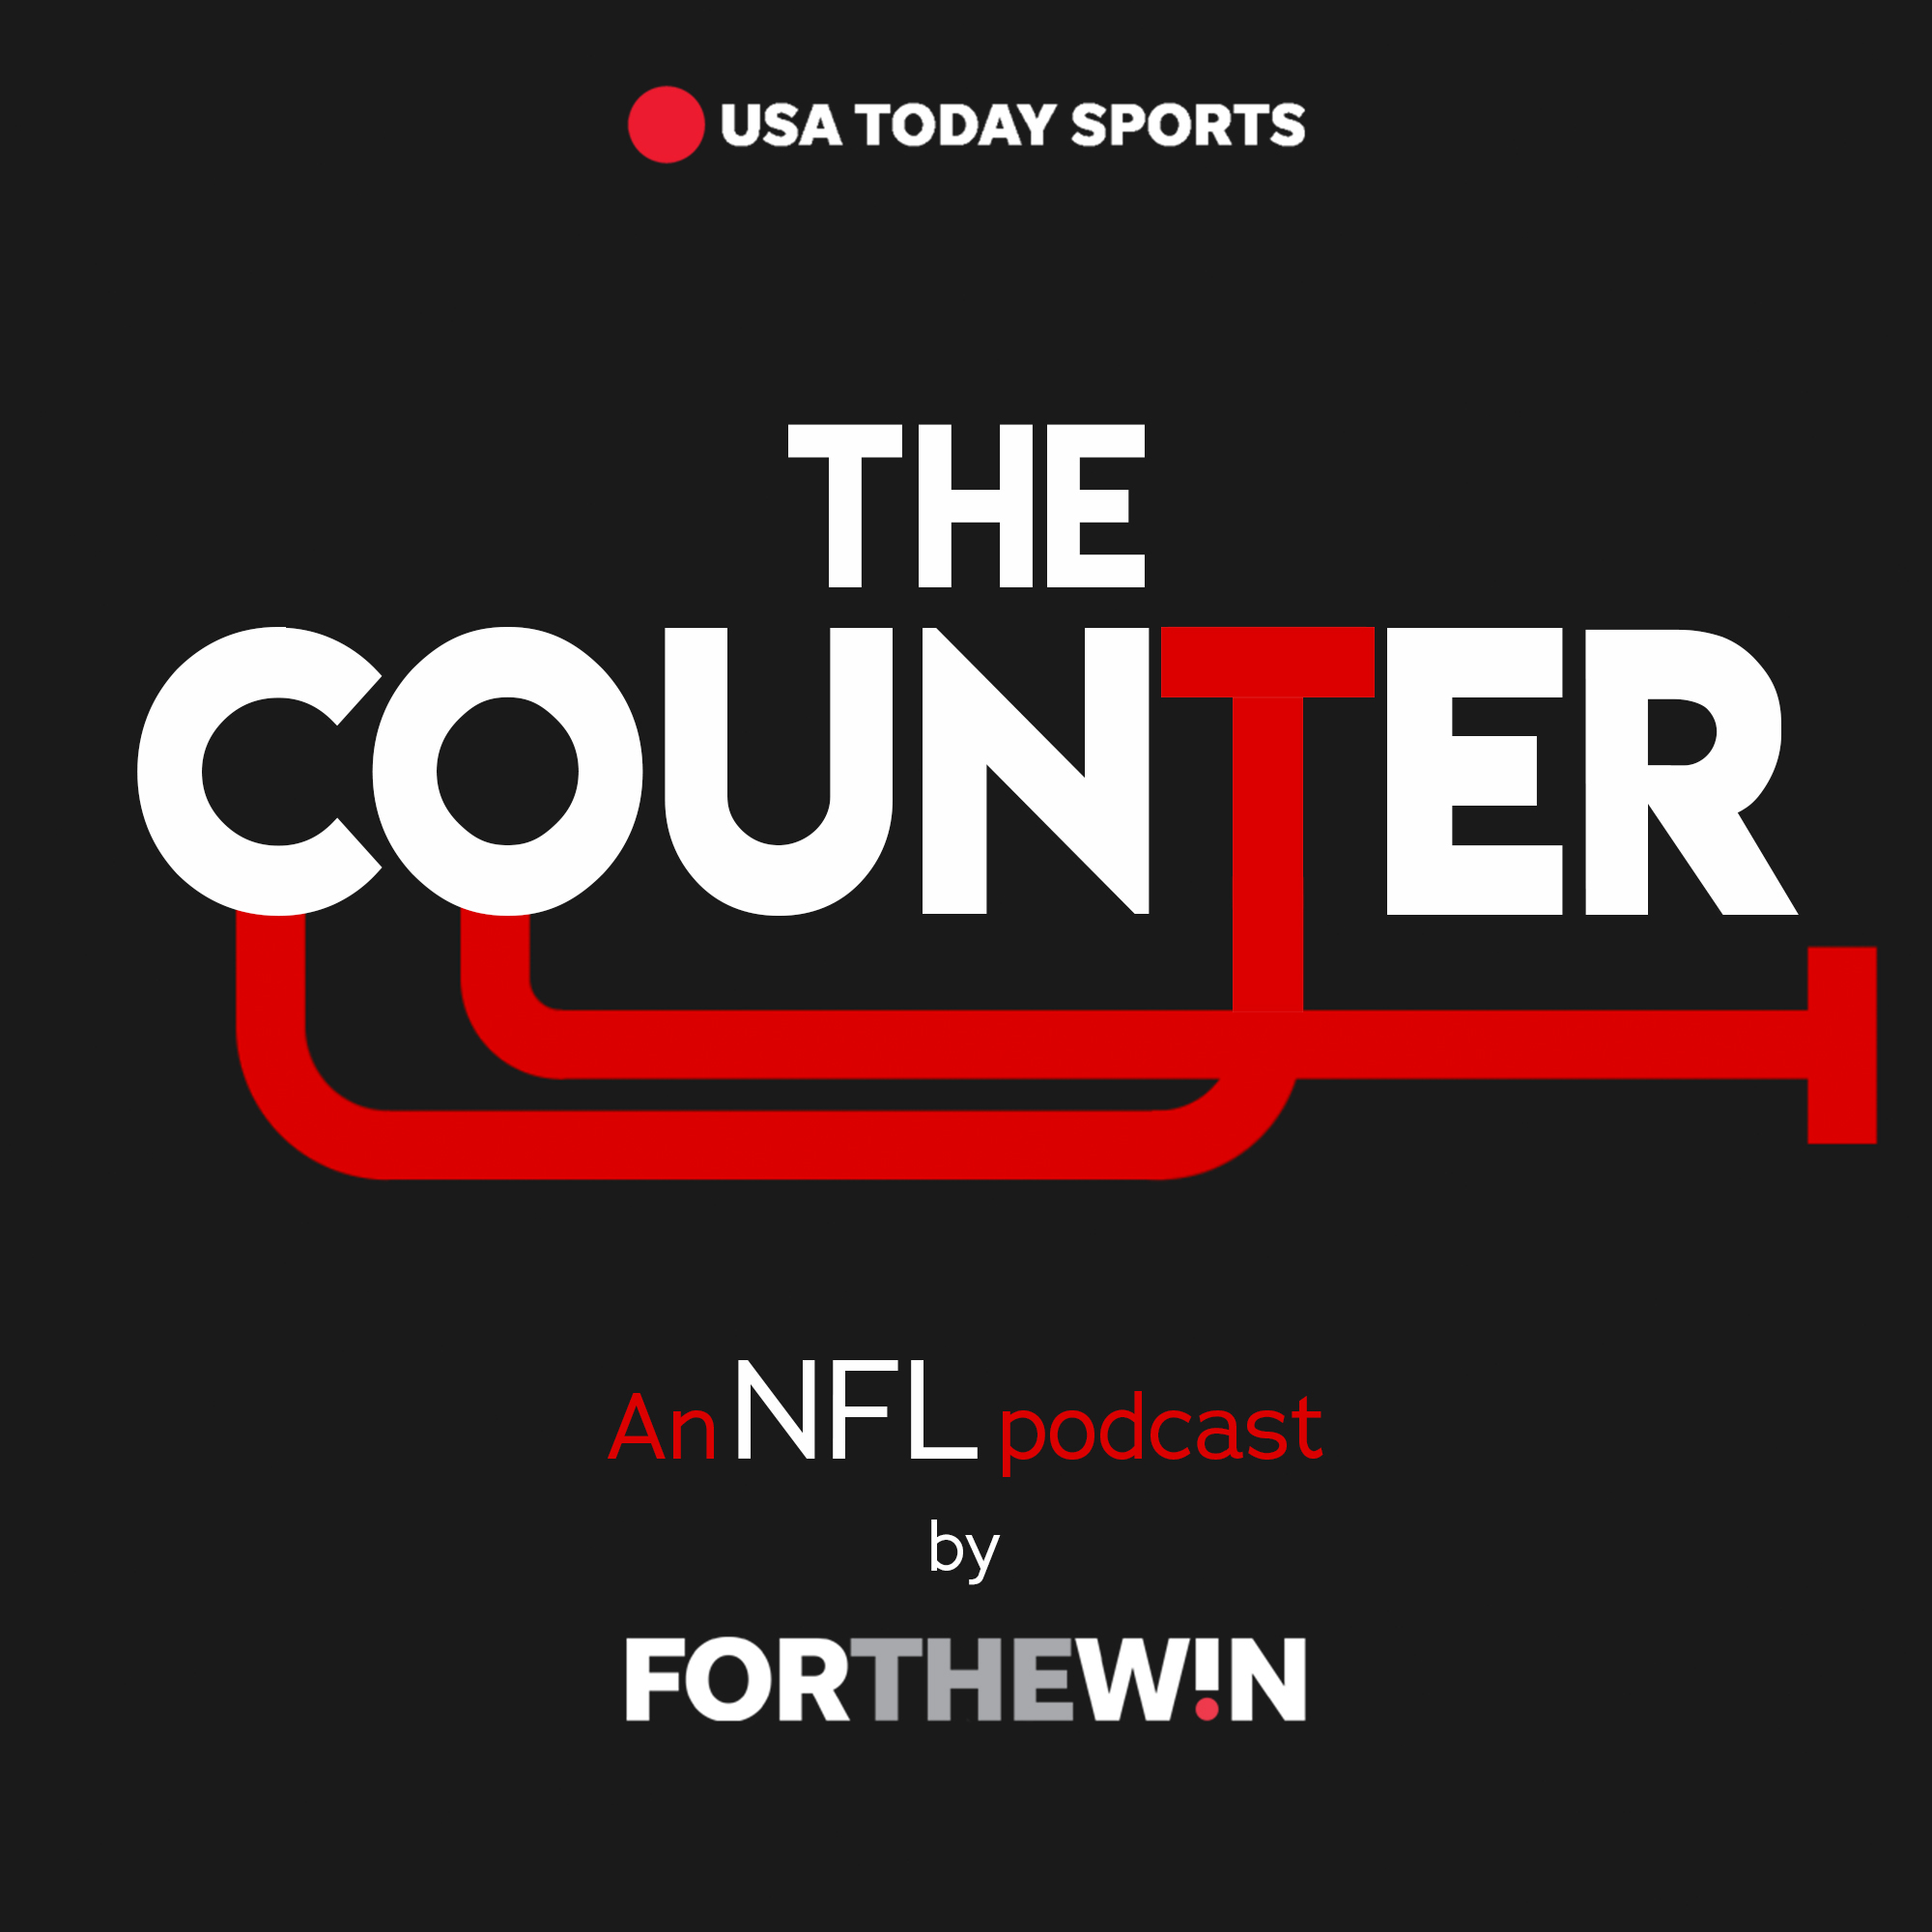 The Counter: An NFL Podcast by For The Win - Draft-eligible QB scouting report, Wild Card games we want to see, and Under-the-radar players